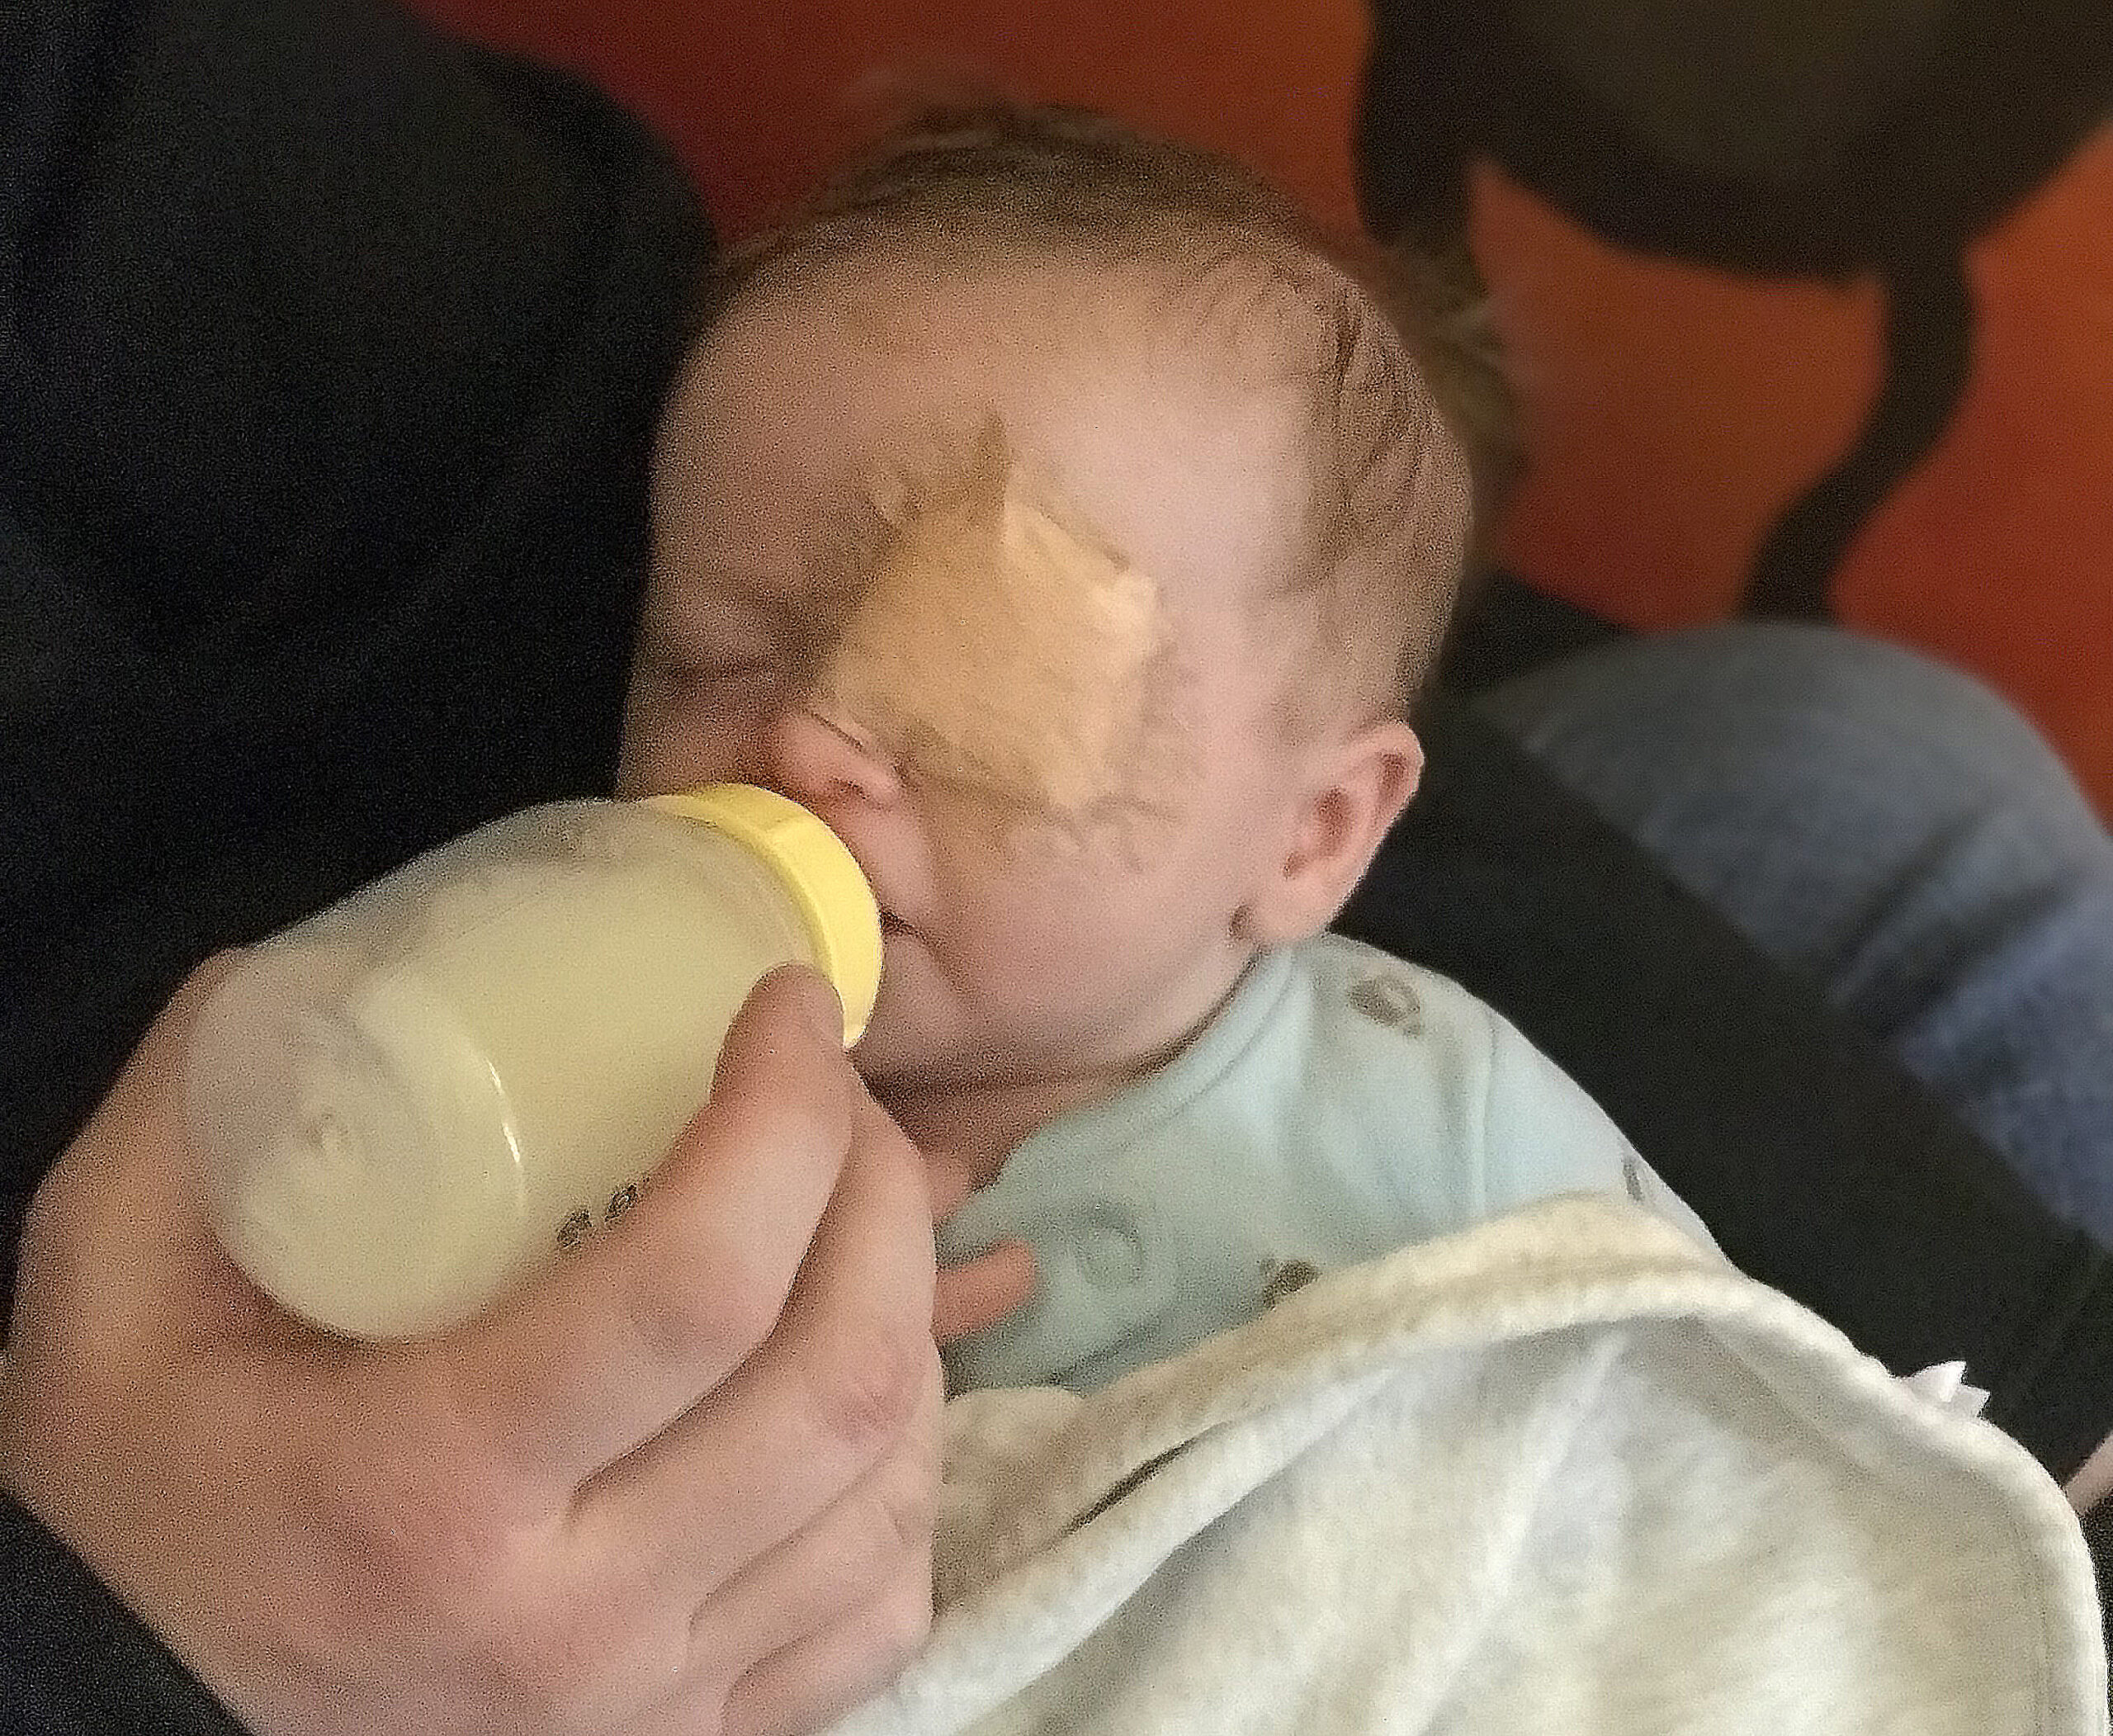 An infant with an eyepatch drinking from a bottle